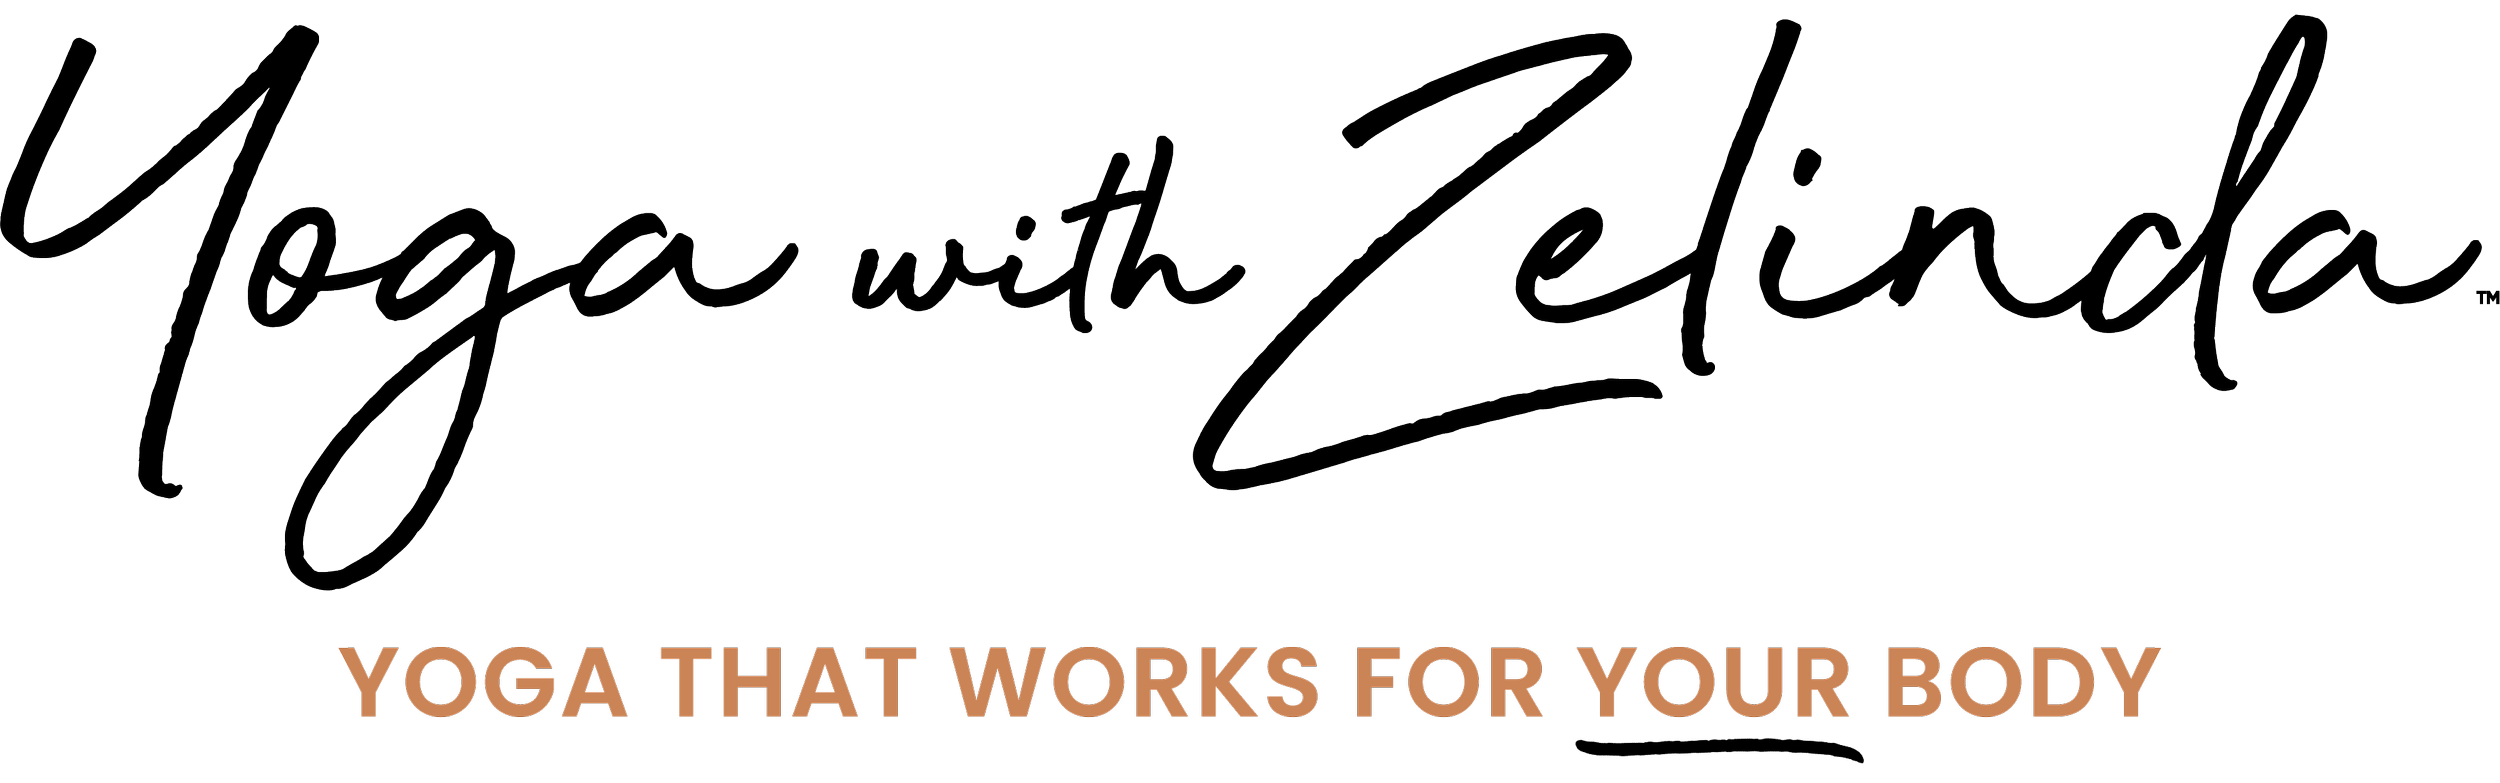 YwZ - Yoga that works for your body banner logo.png